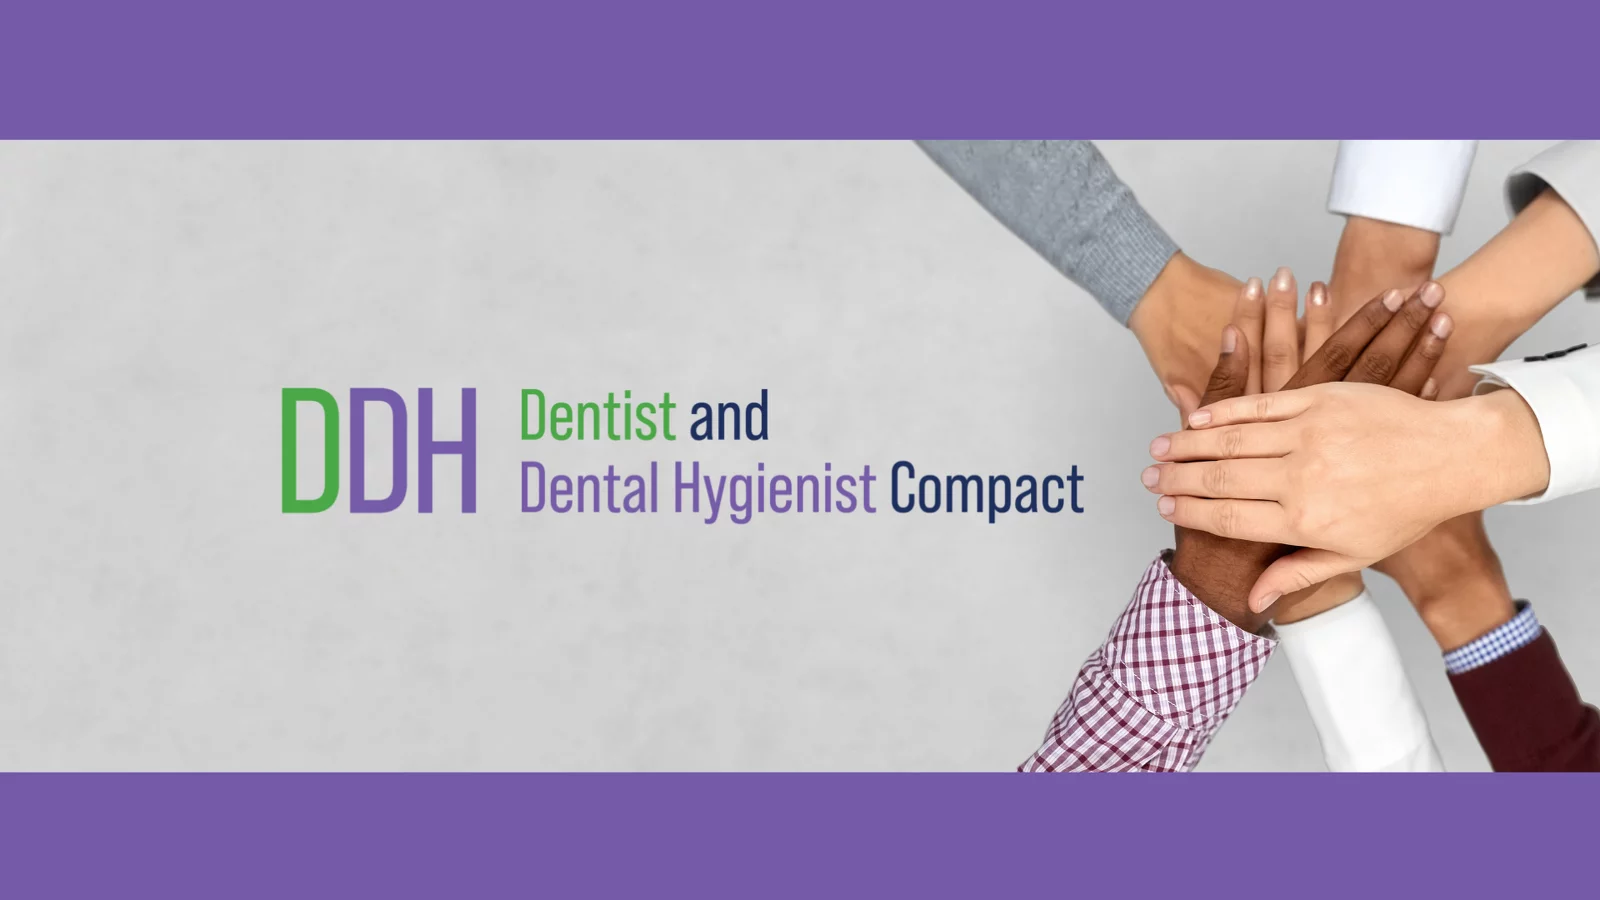 Dentist and Dental Hygienist Compact - 7 people doing a hand stack